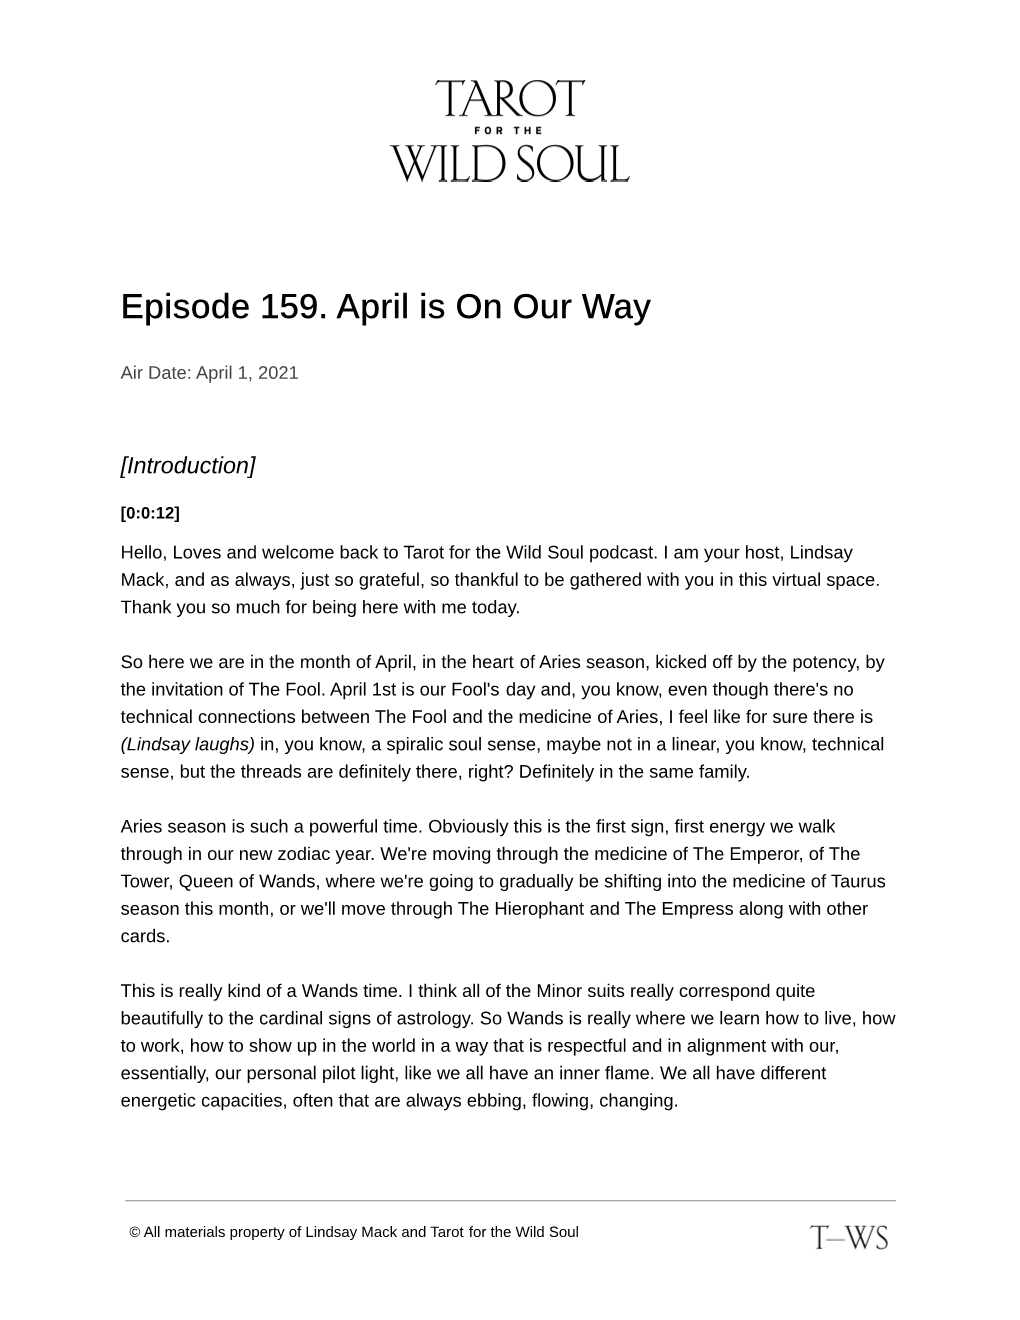 Episode 159. April Is on Our Way